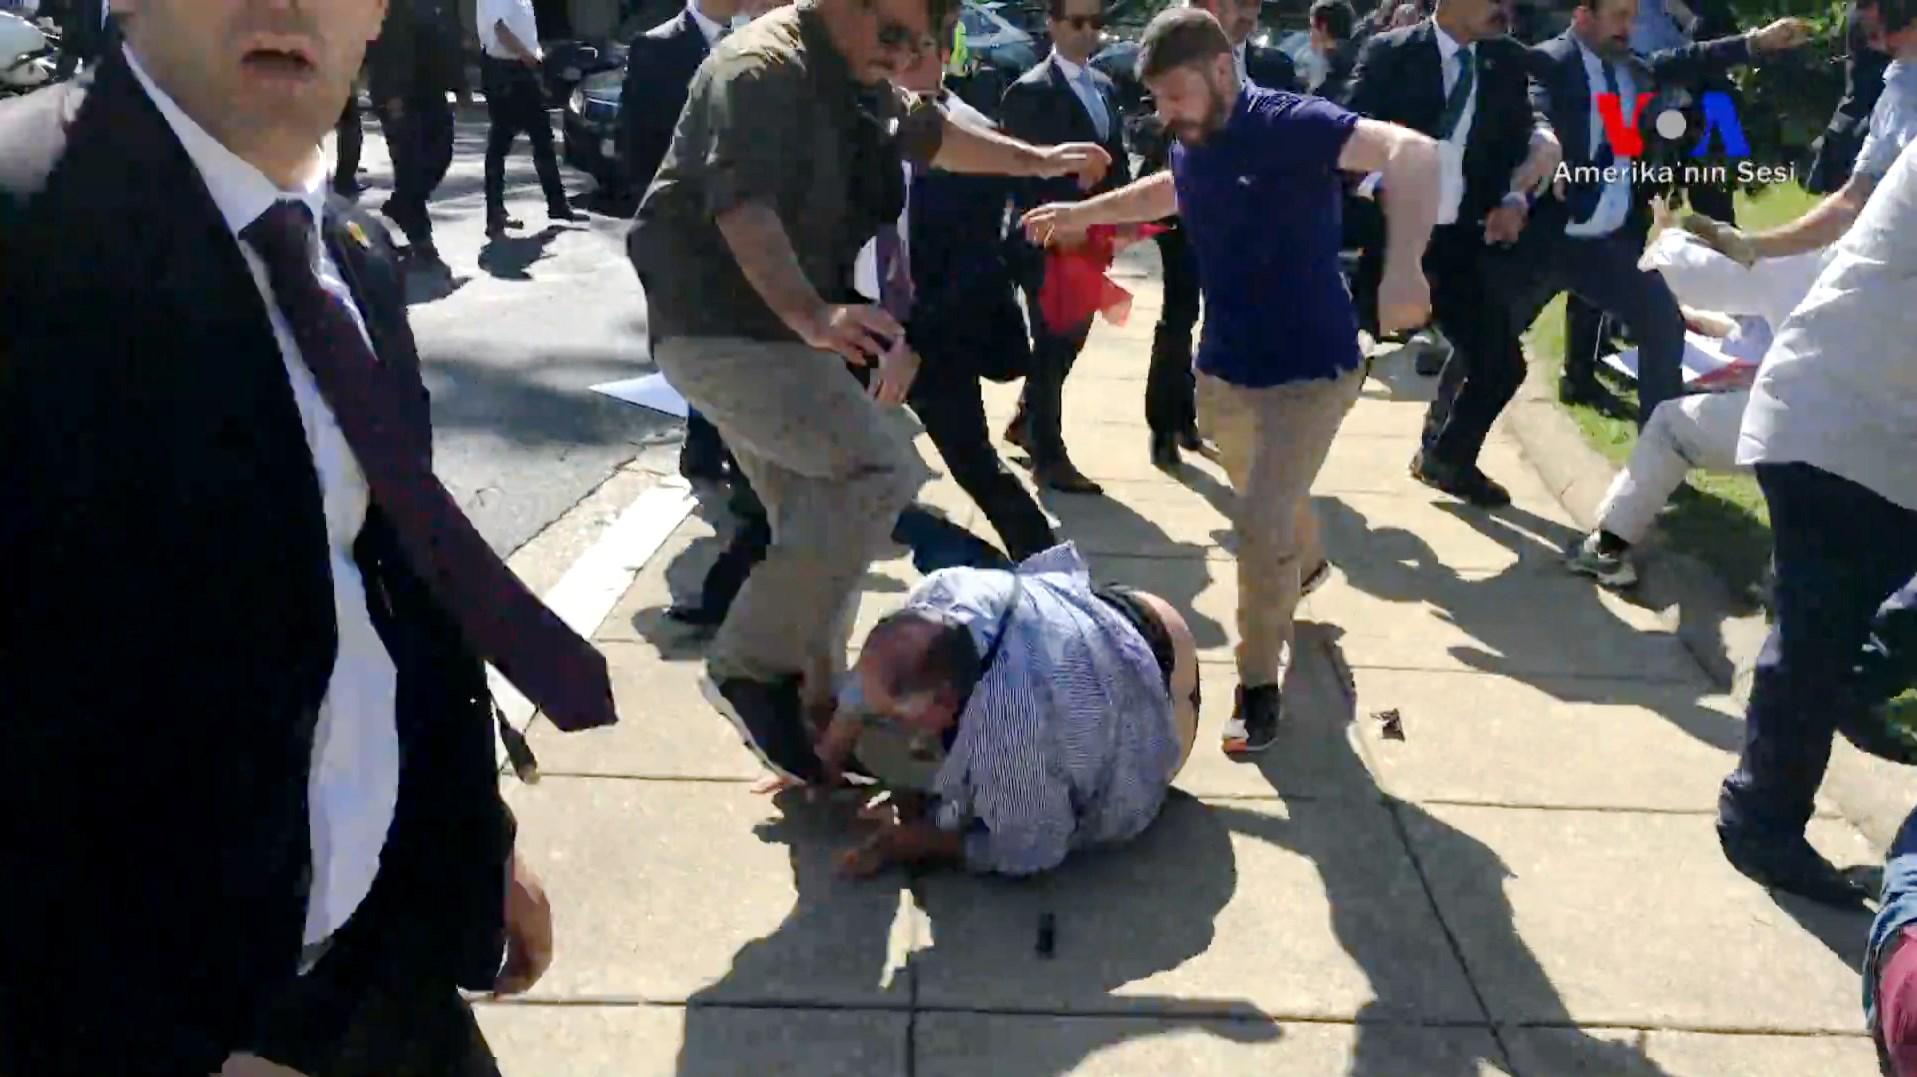 two men kick a protester on the ground 